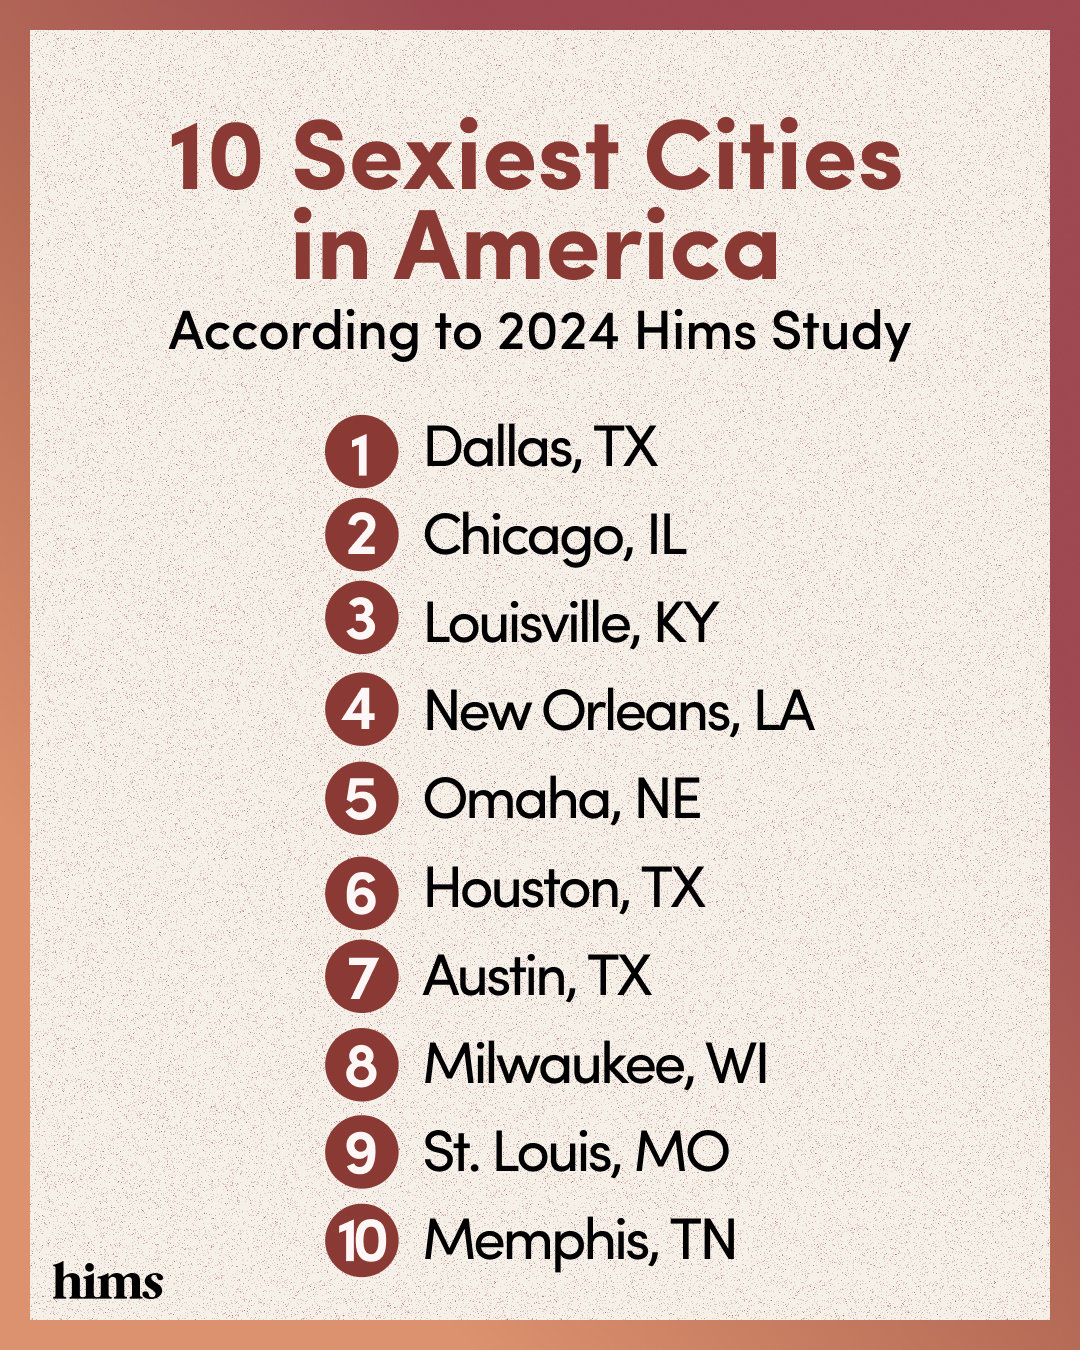 Infographic showing the 10 Sexiest Cities in America.